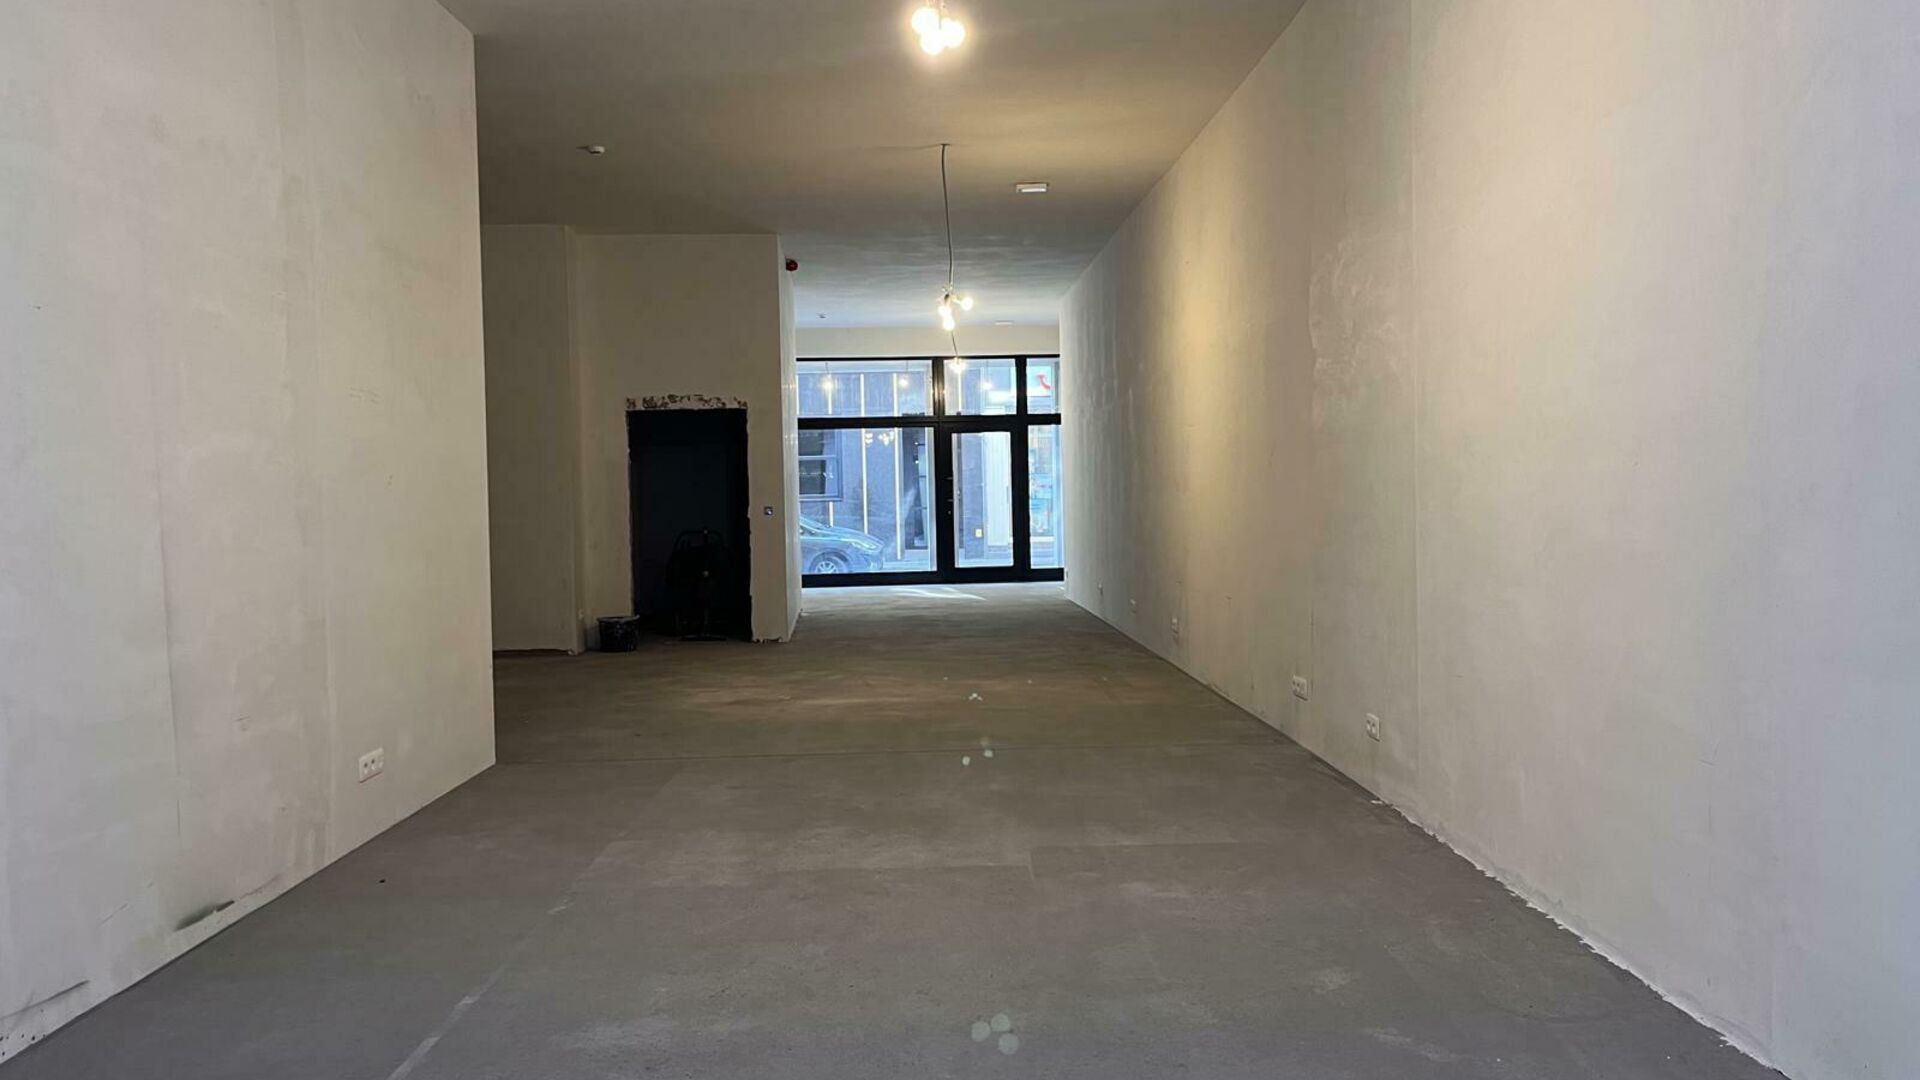 Renovated commercial property in the center of Tienen, perfectly located between the Grote Markt, spiegelstraat and parking Manege (200m). The property has a surface area of 150m2 with a large and modern new display window with large showcase, very high c